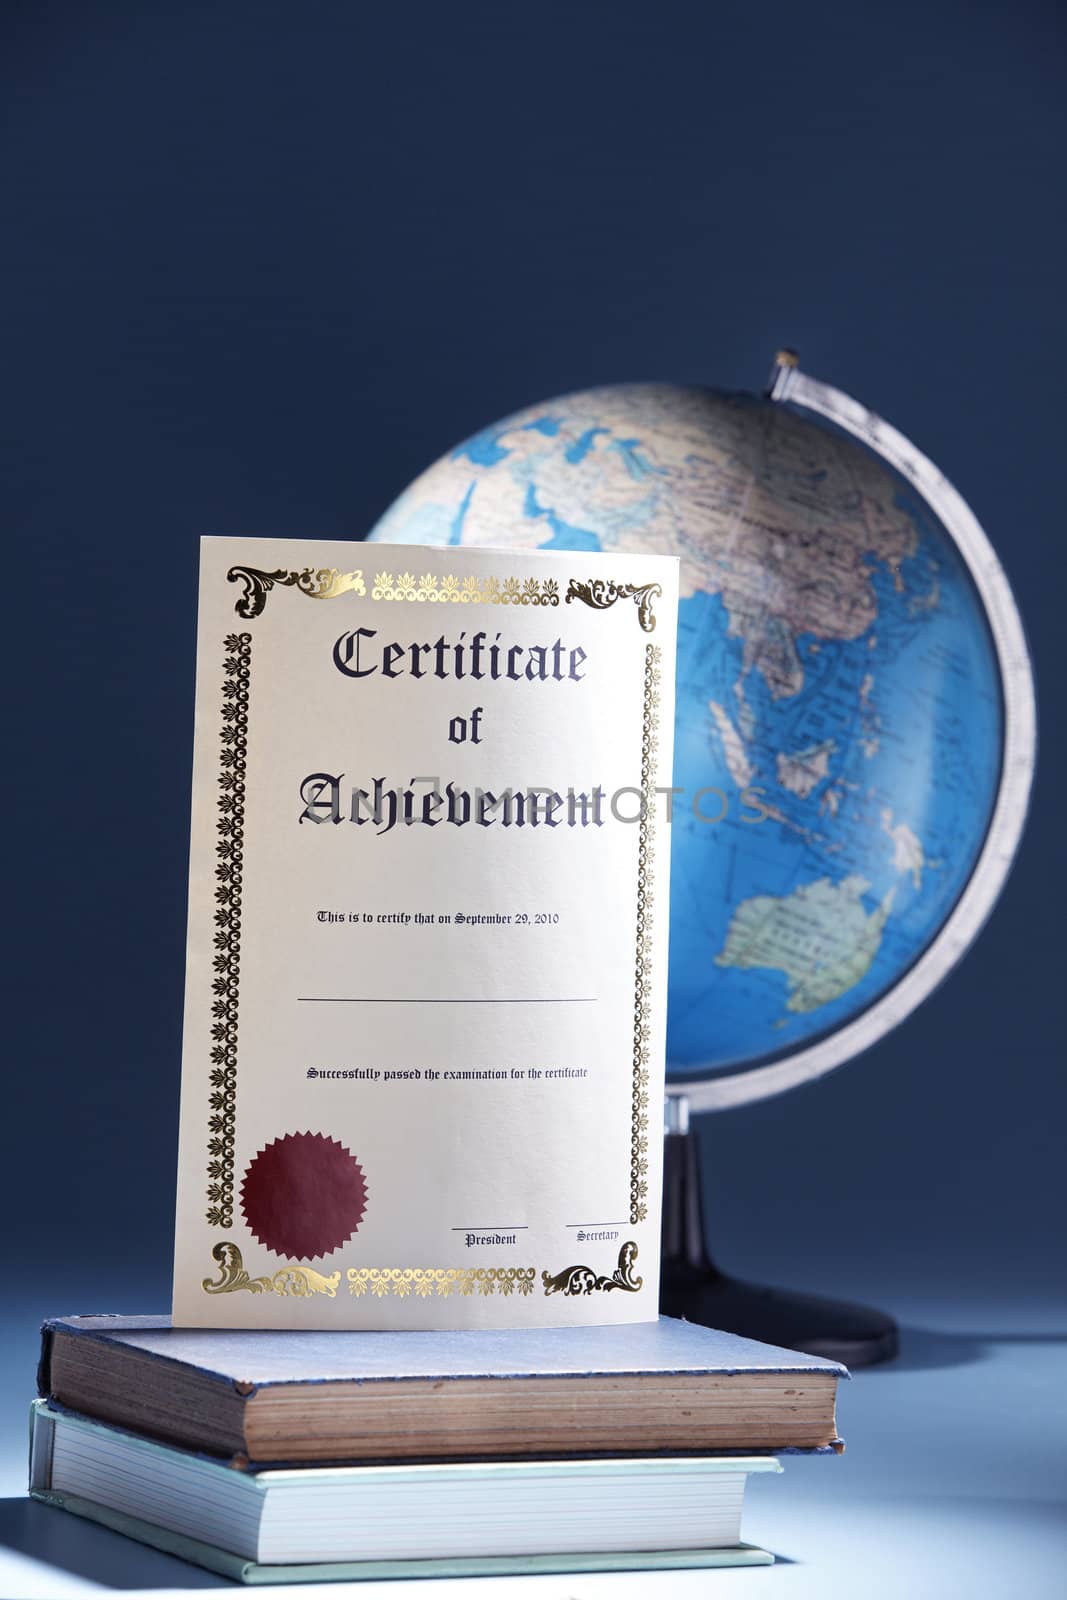 education concept with certificate and globe